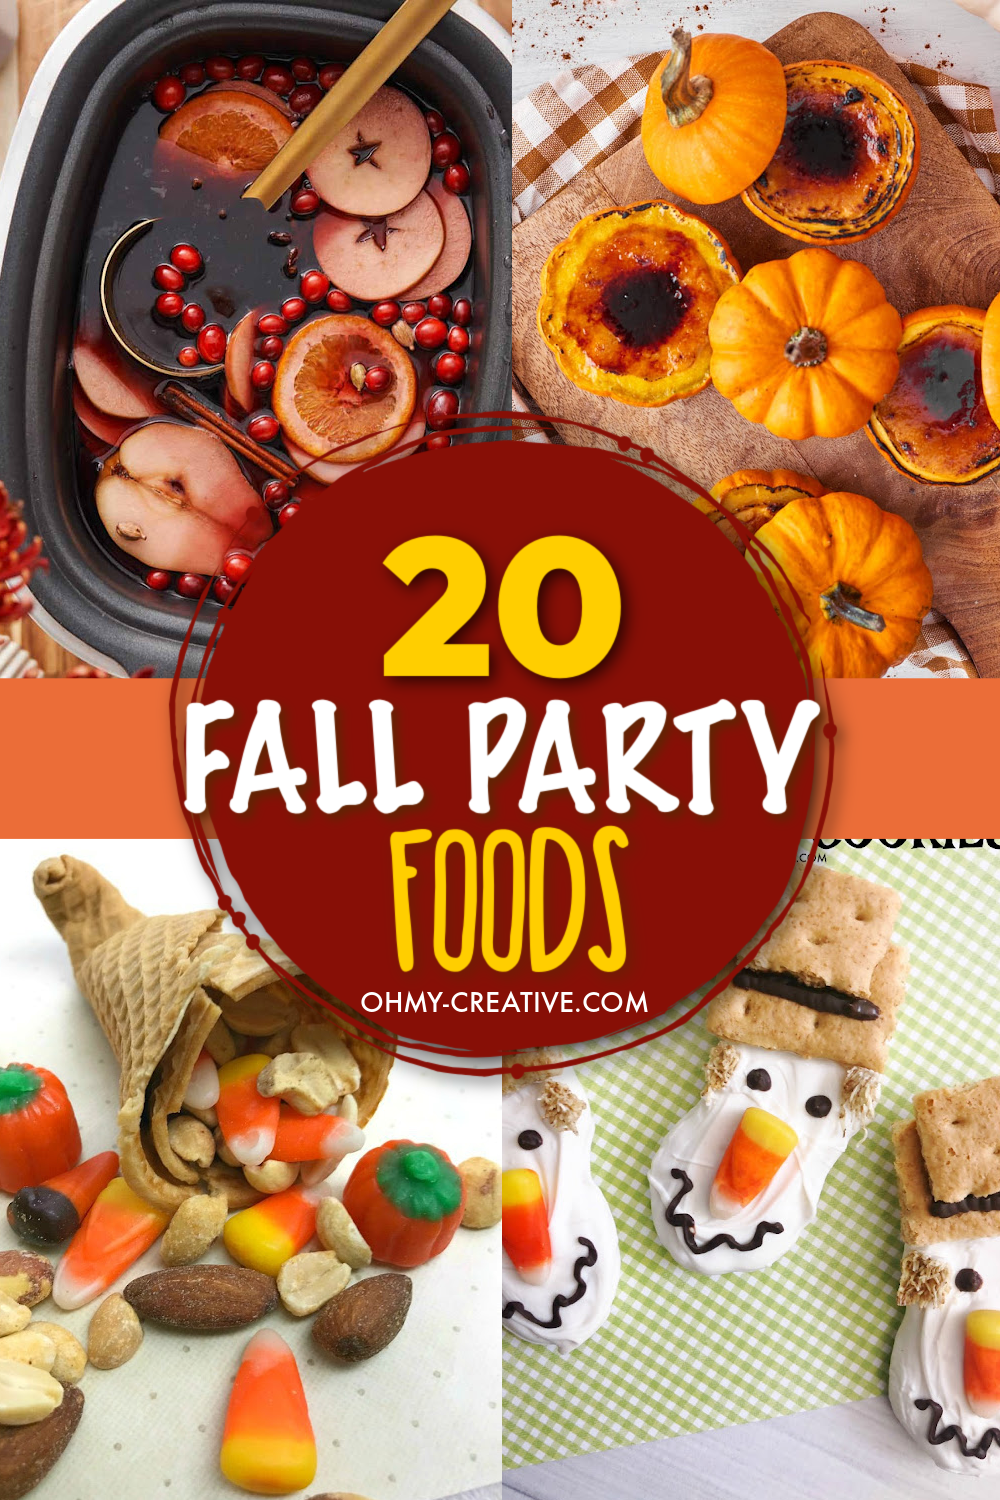 A collage of delicious fall party foods